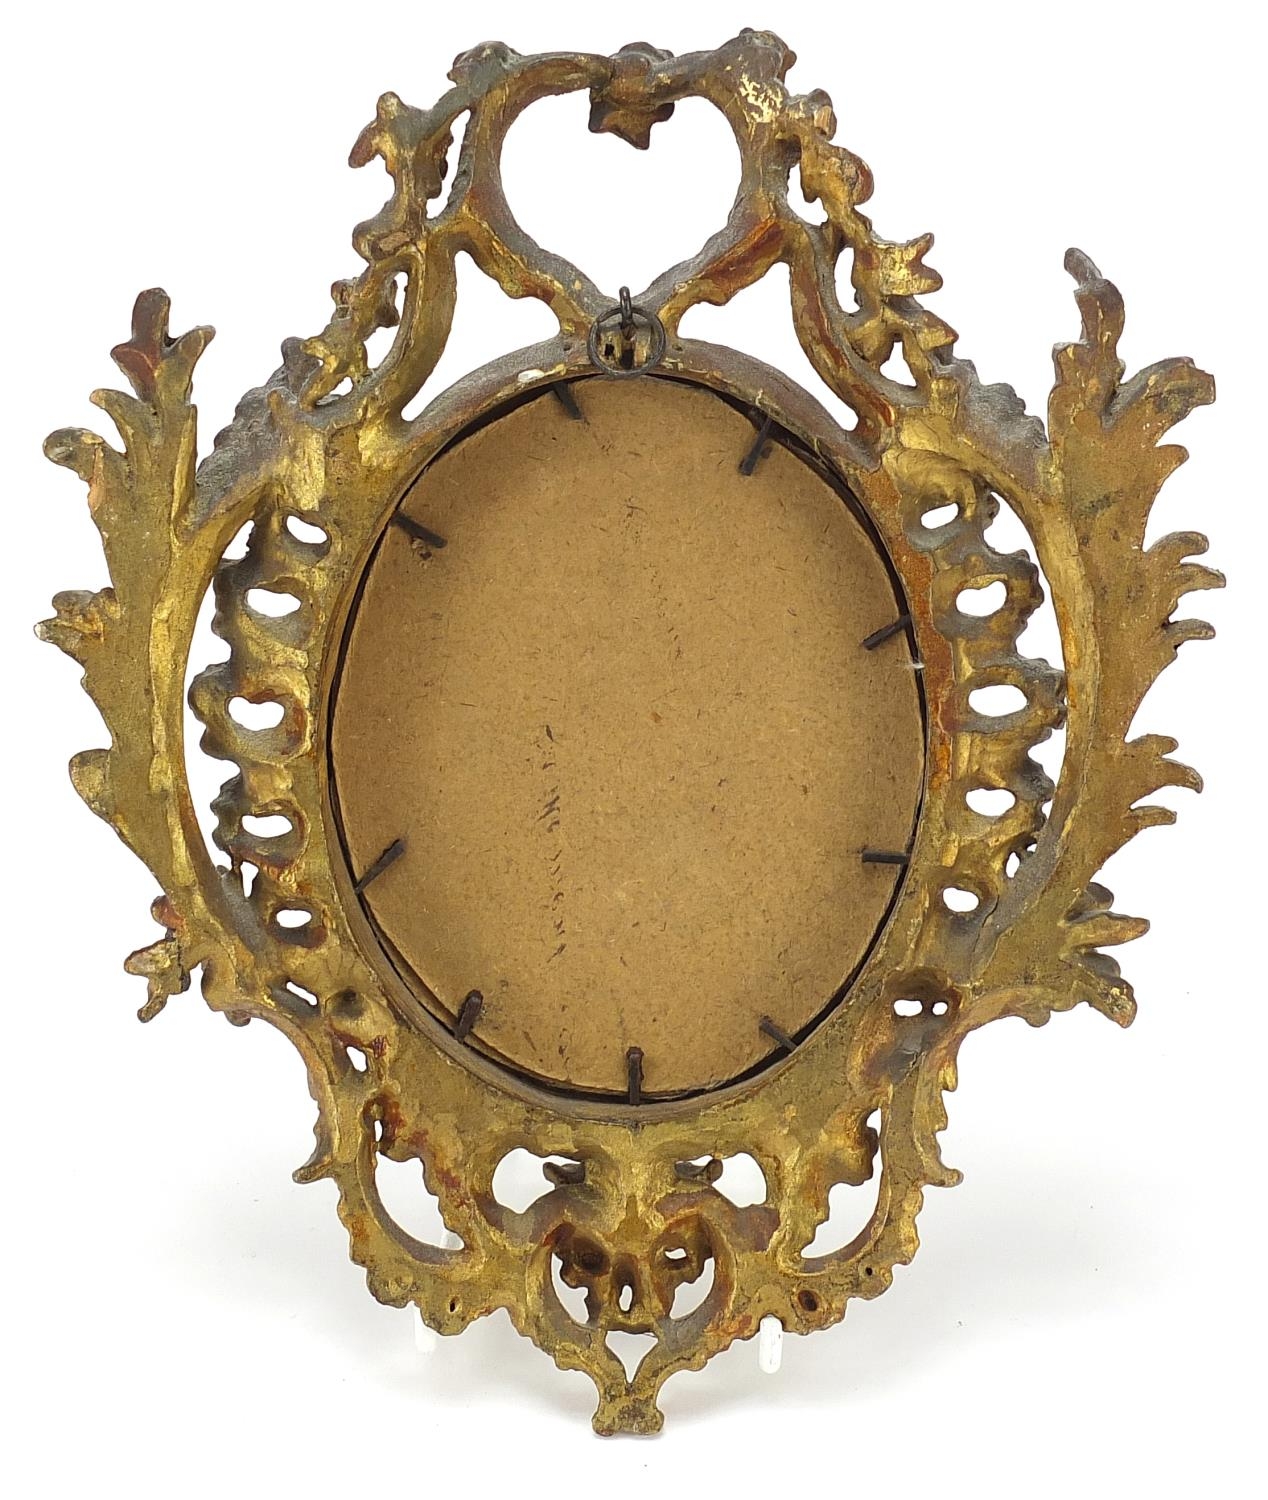 19th century giltwood acanthus design mirror with bevelled glass, 22cm x 18cm - Image 2 of 2